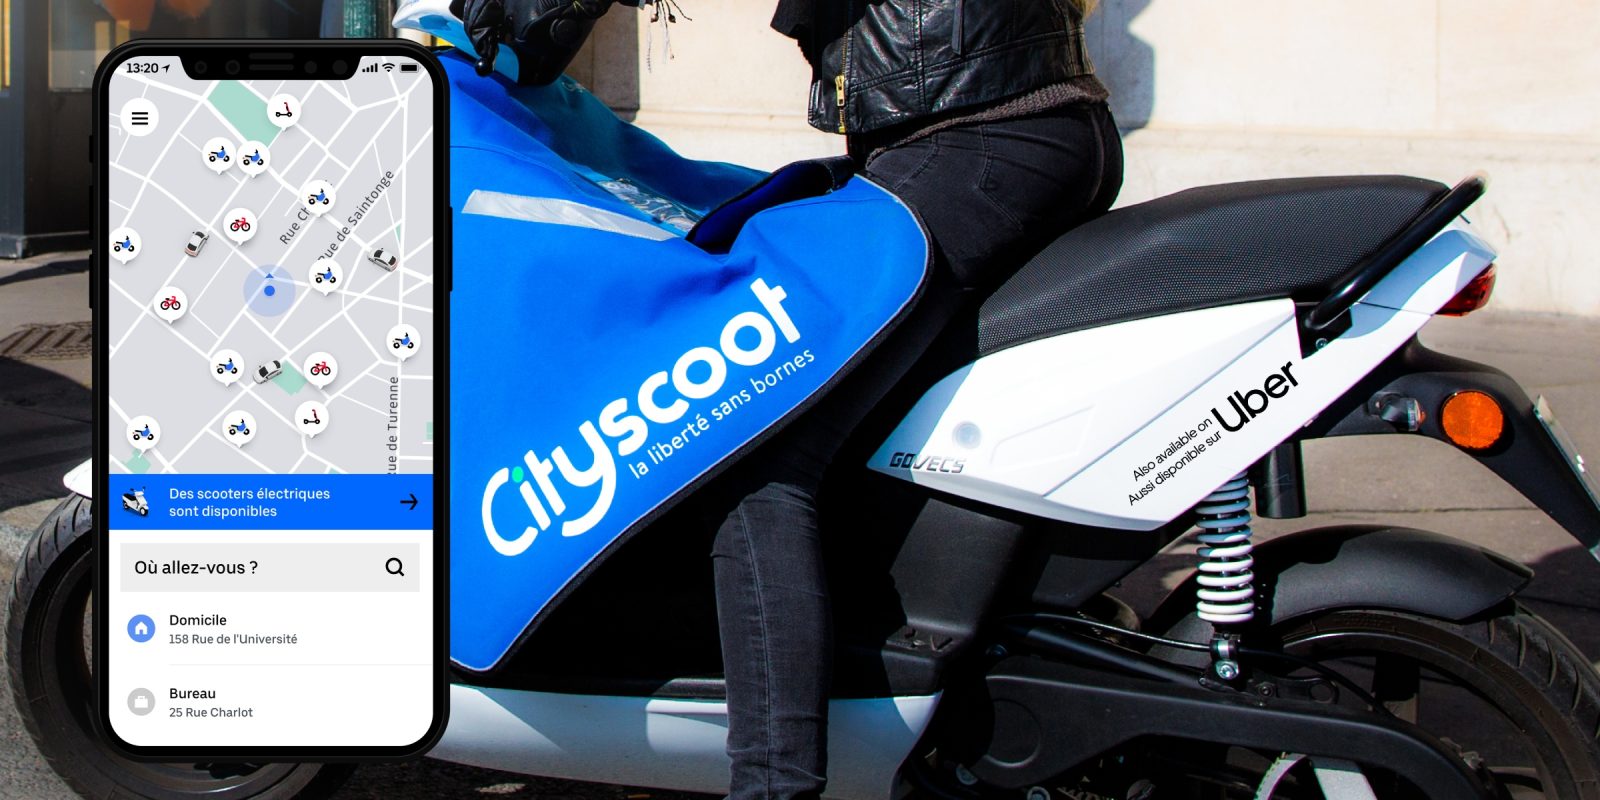 uber cityscoot electric moped